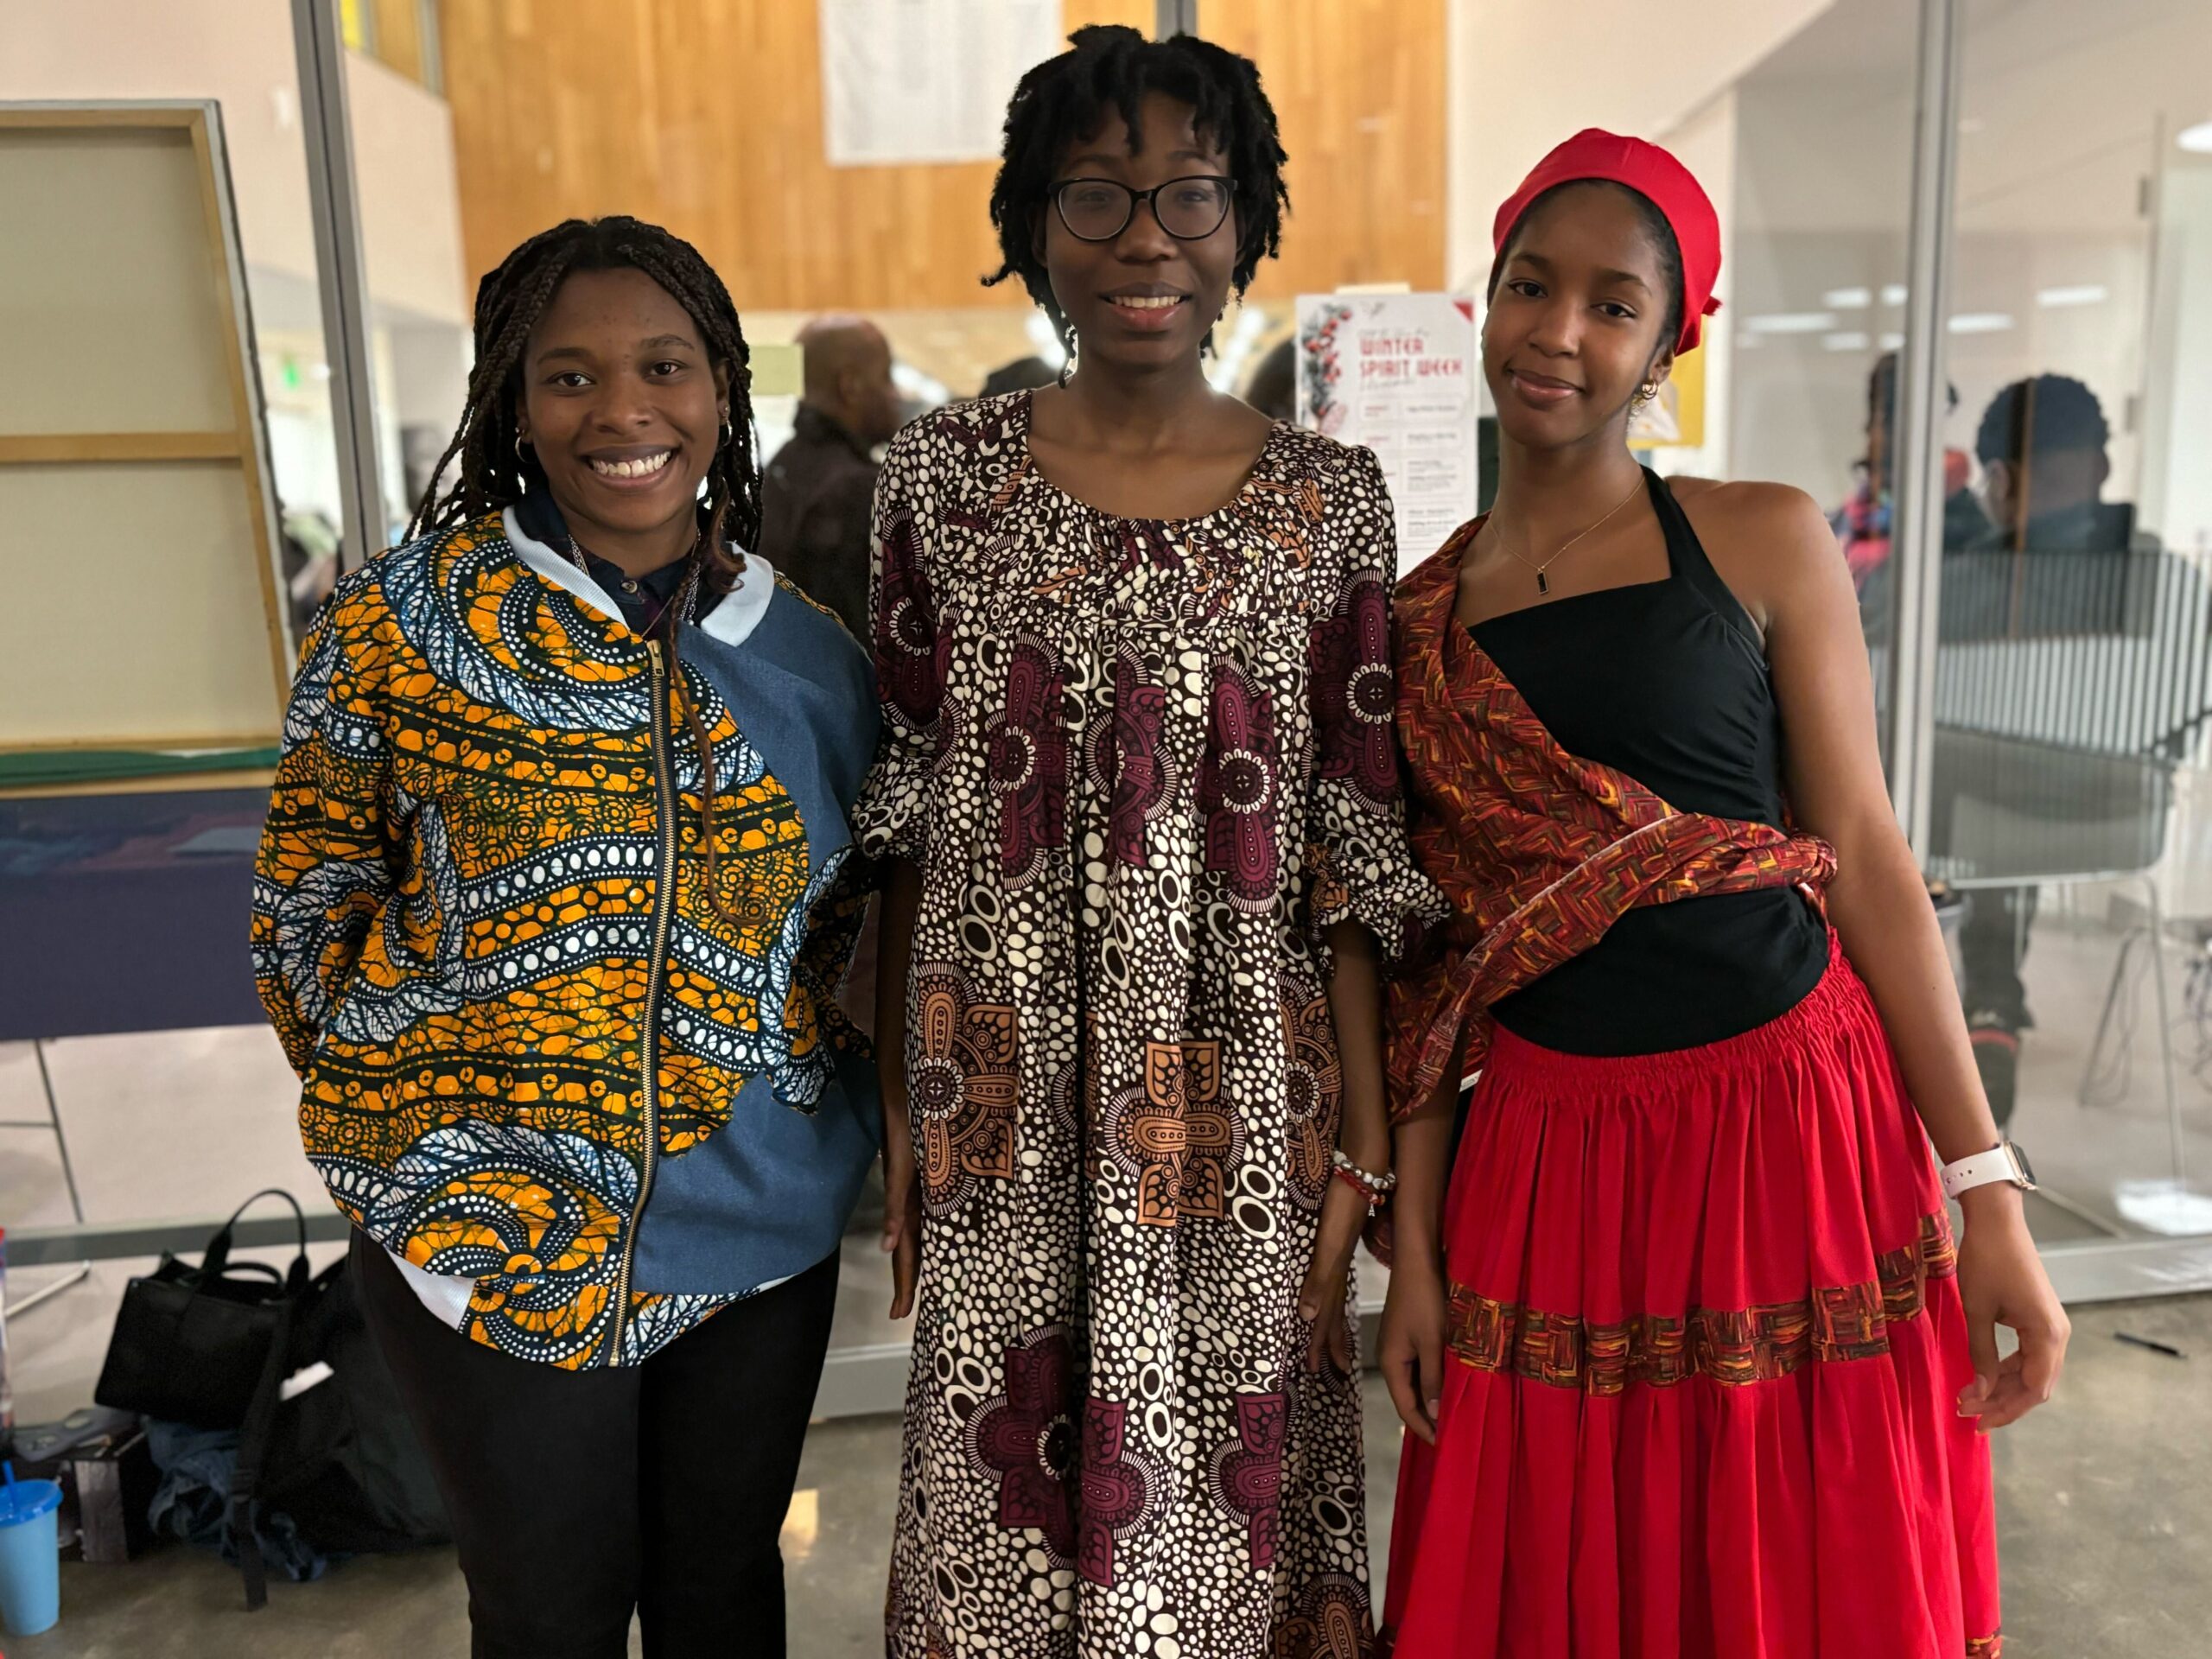 Celebrating African Diasporic Cultures Museum: A Night of Joy, Learning ...